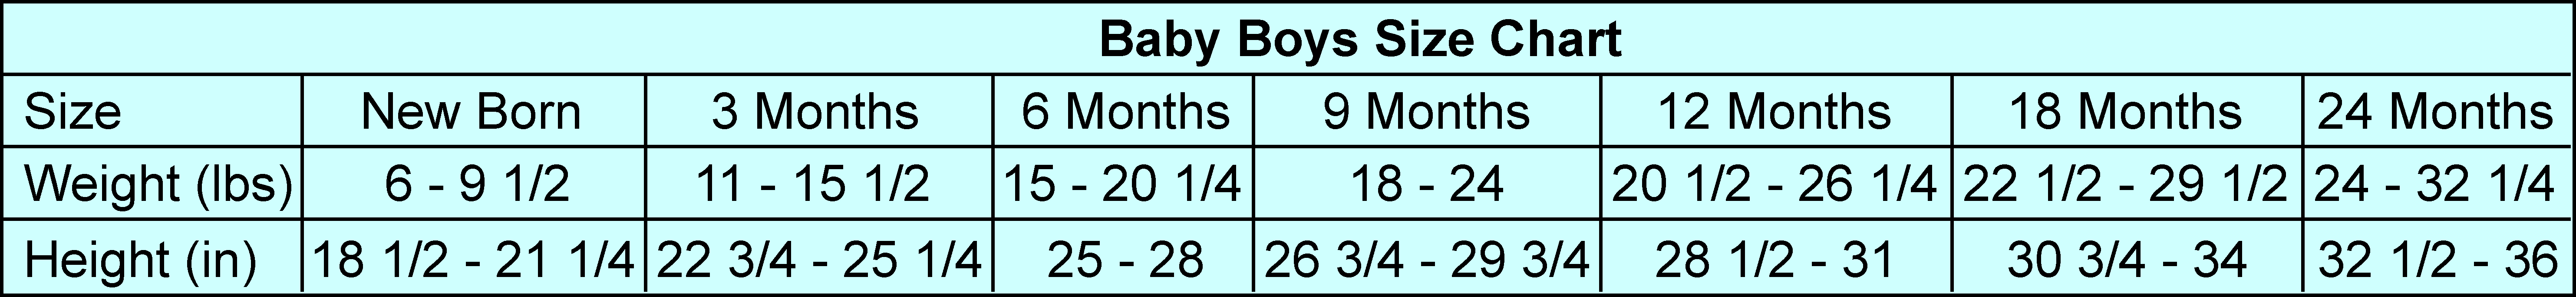 Baby boys weight and height size chart